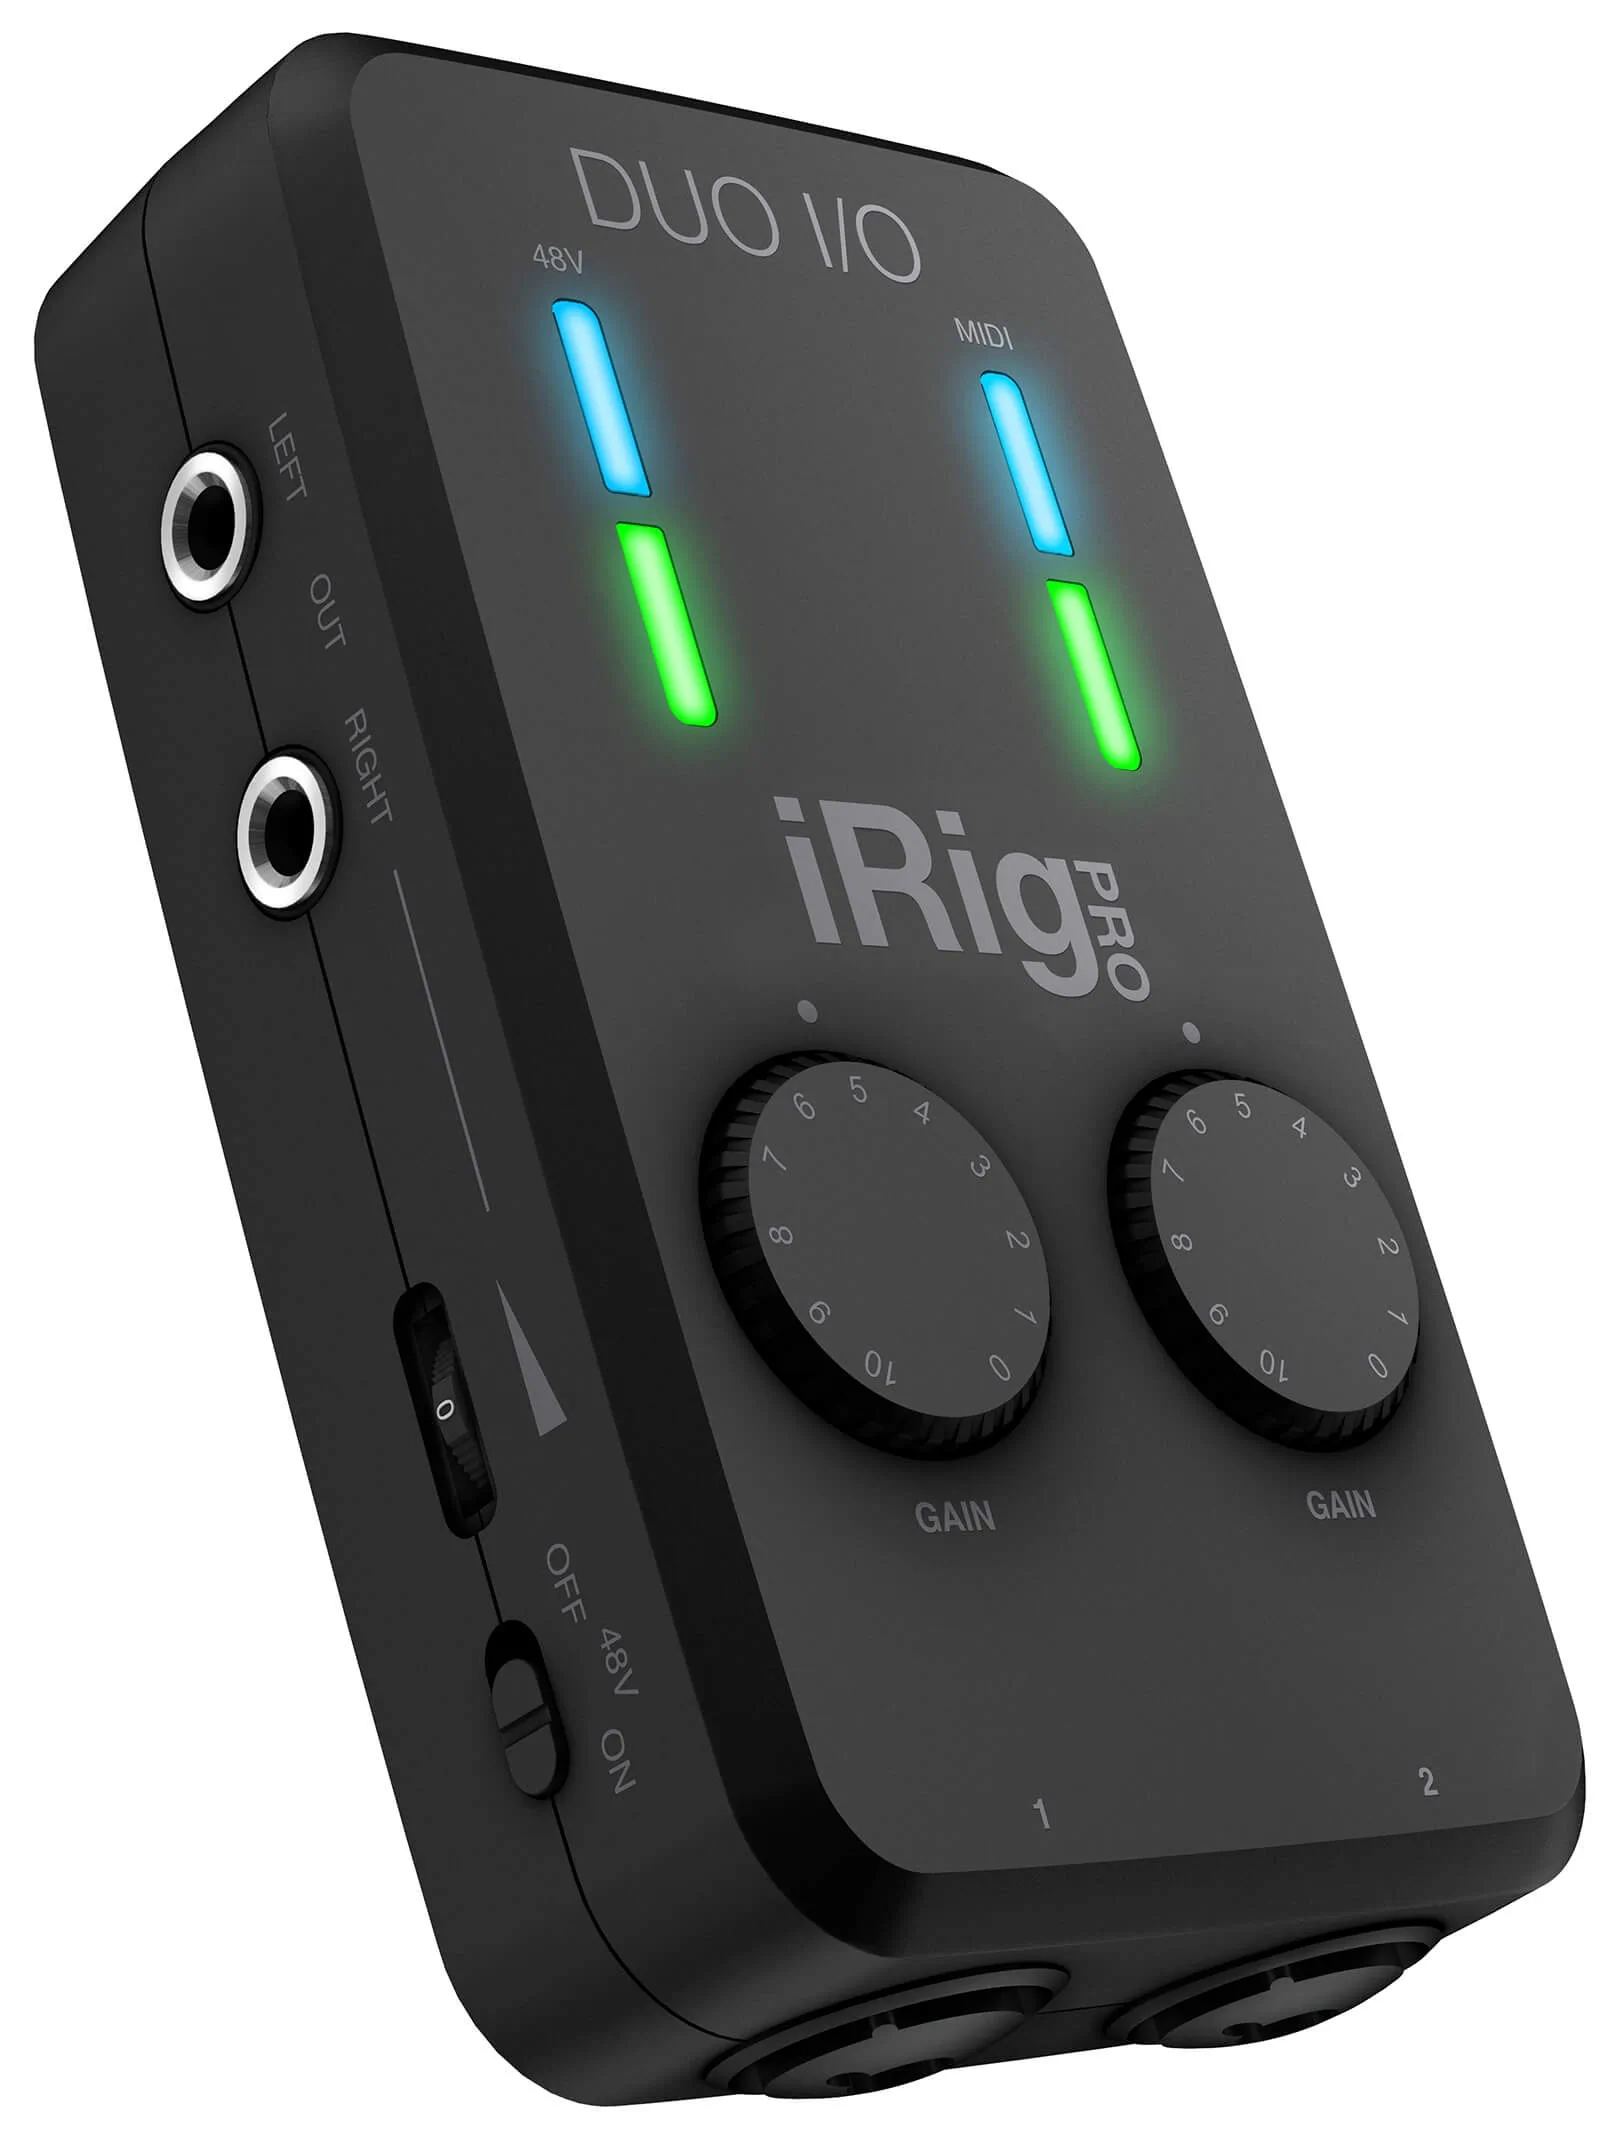 iRig Pro Duo I/O audio interface adds dedicated Windows drivers and more